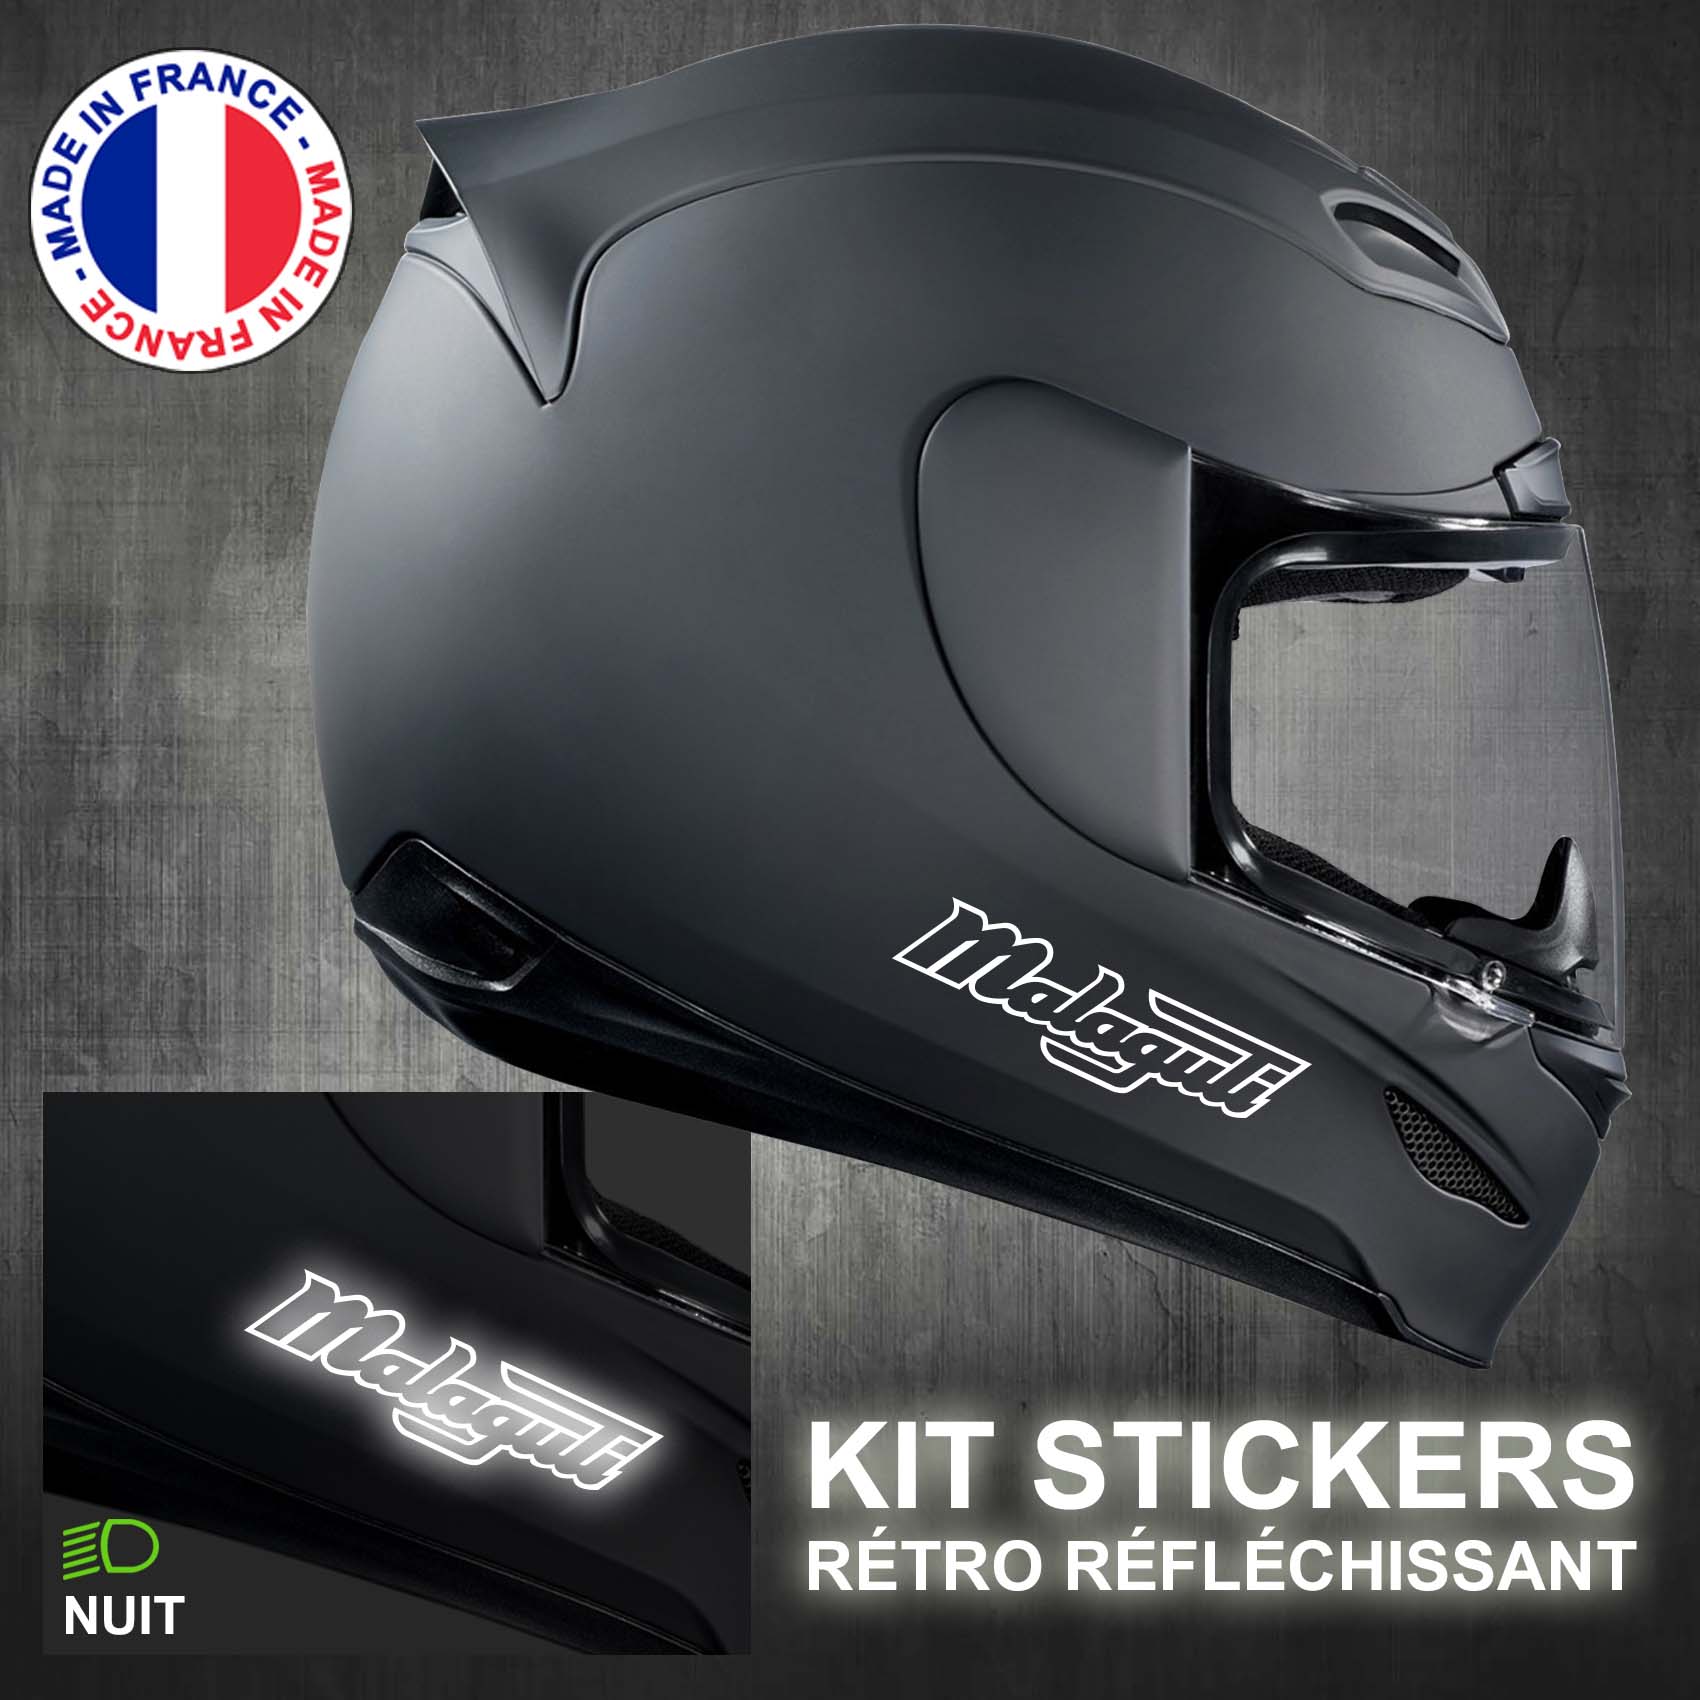 stickers-casque-moto-malaguti-ref1-retro-reflechissant-autocollant-noir-moto-velo-tuning-racing-route-sticker-casques-adhesif-scooter-nuit-securite-decals-personnalise-personnalisable-min